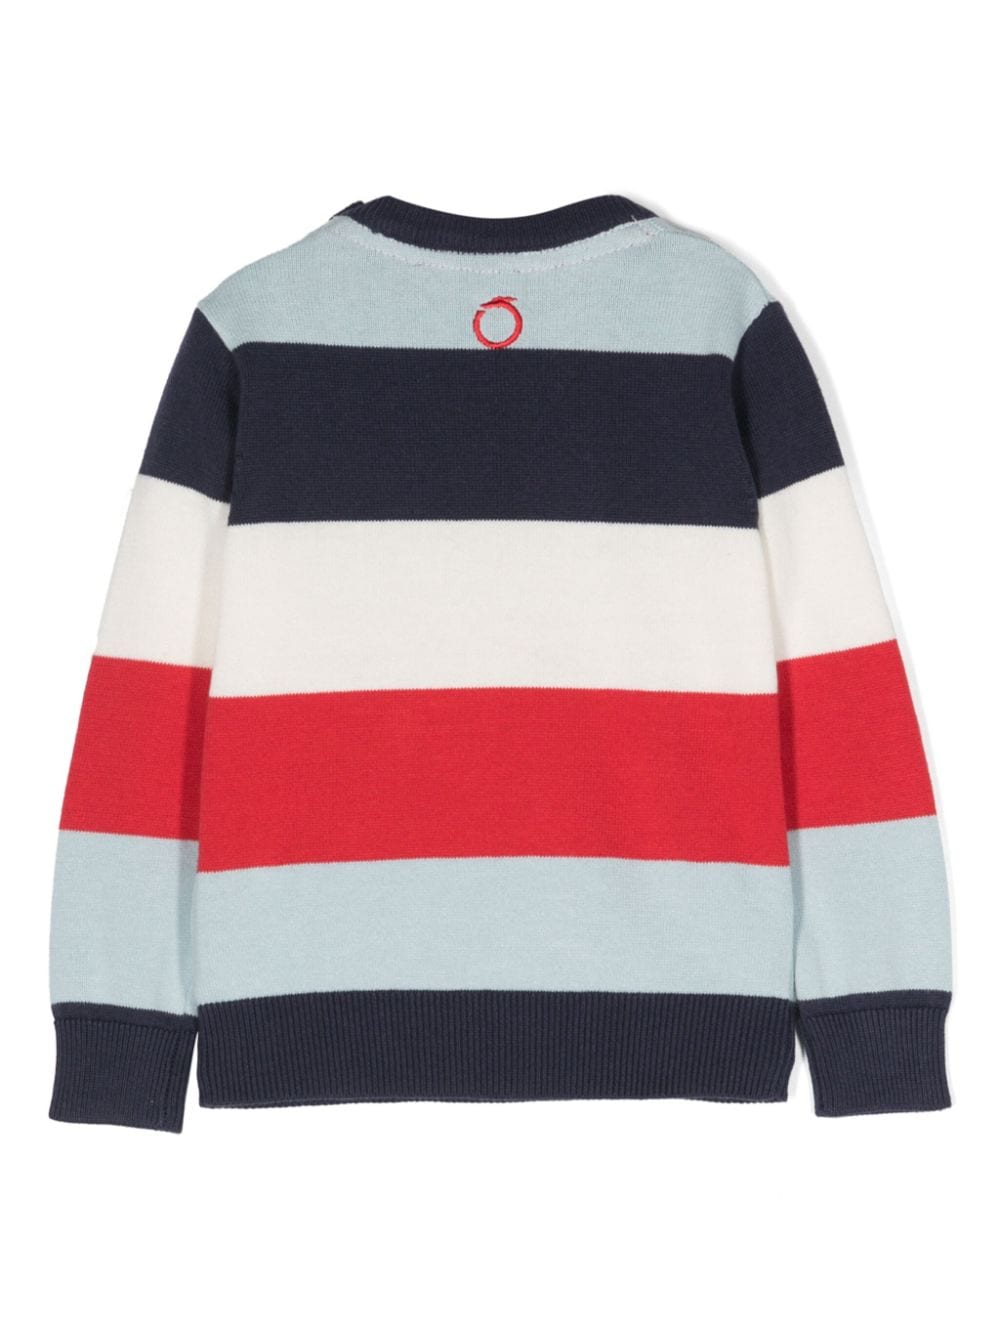 Blue, red and white baby sweater with logo